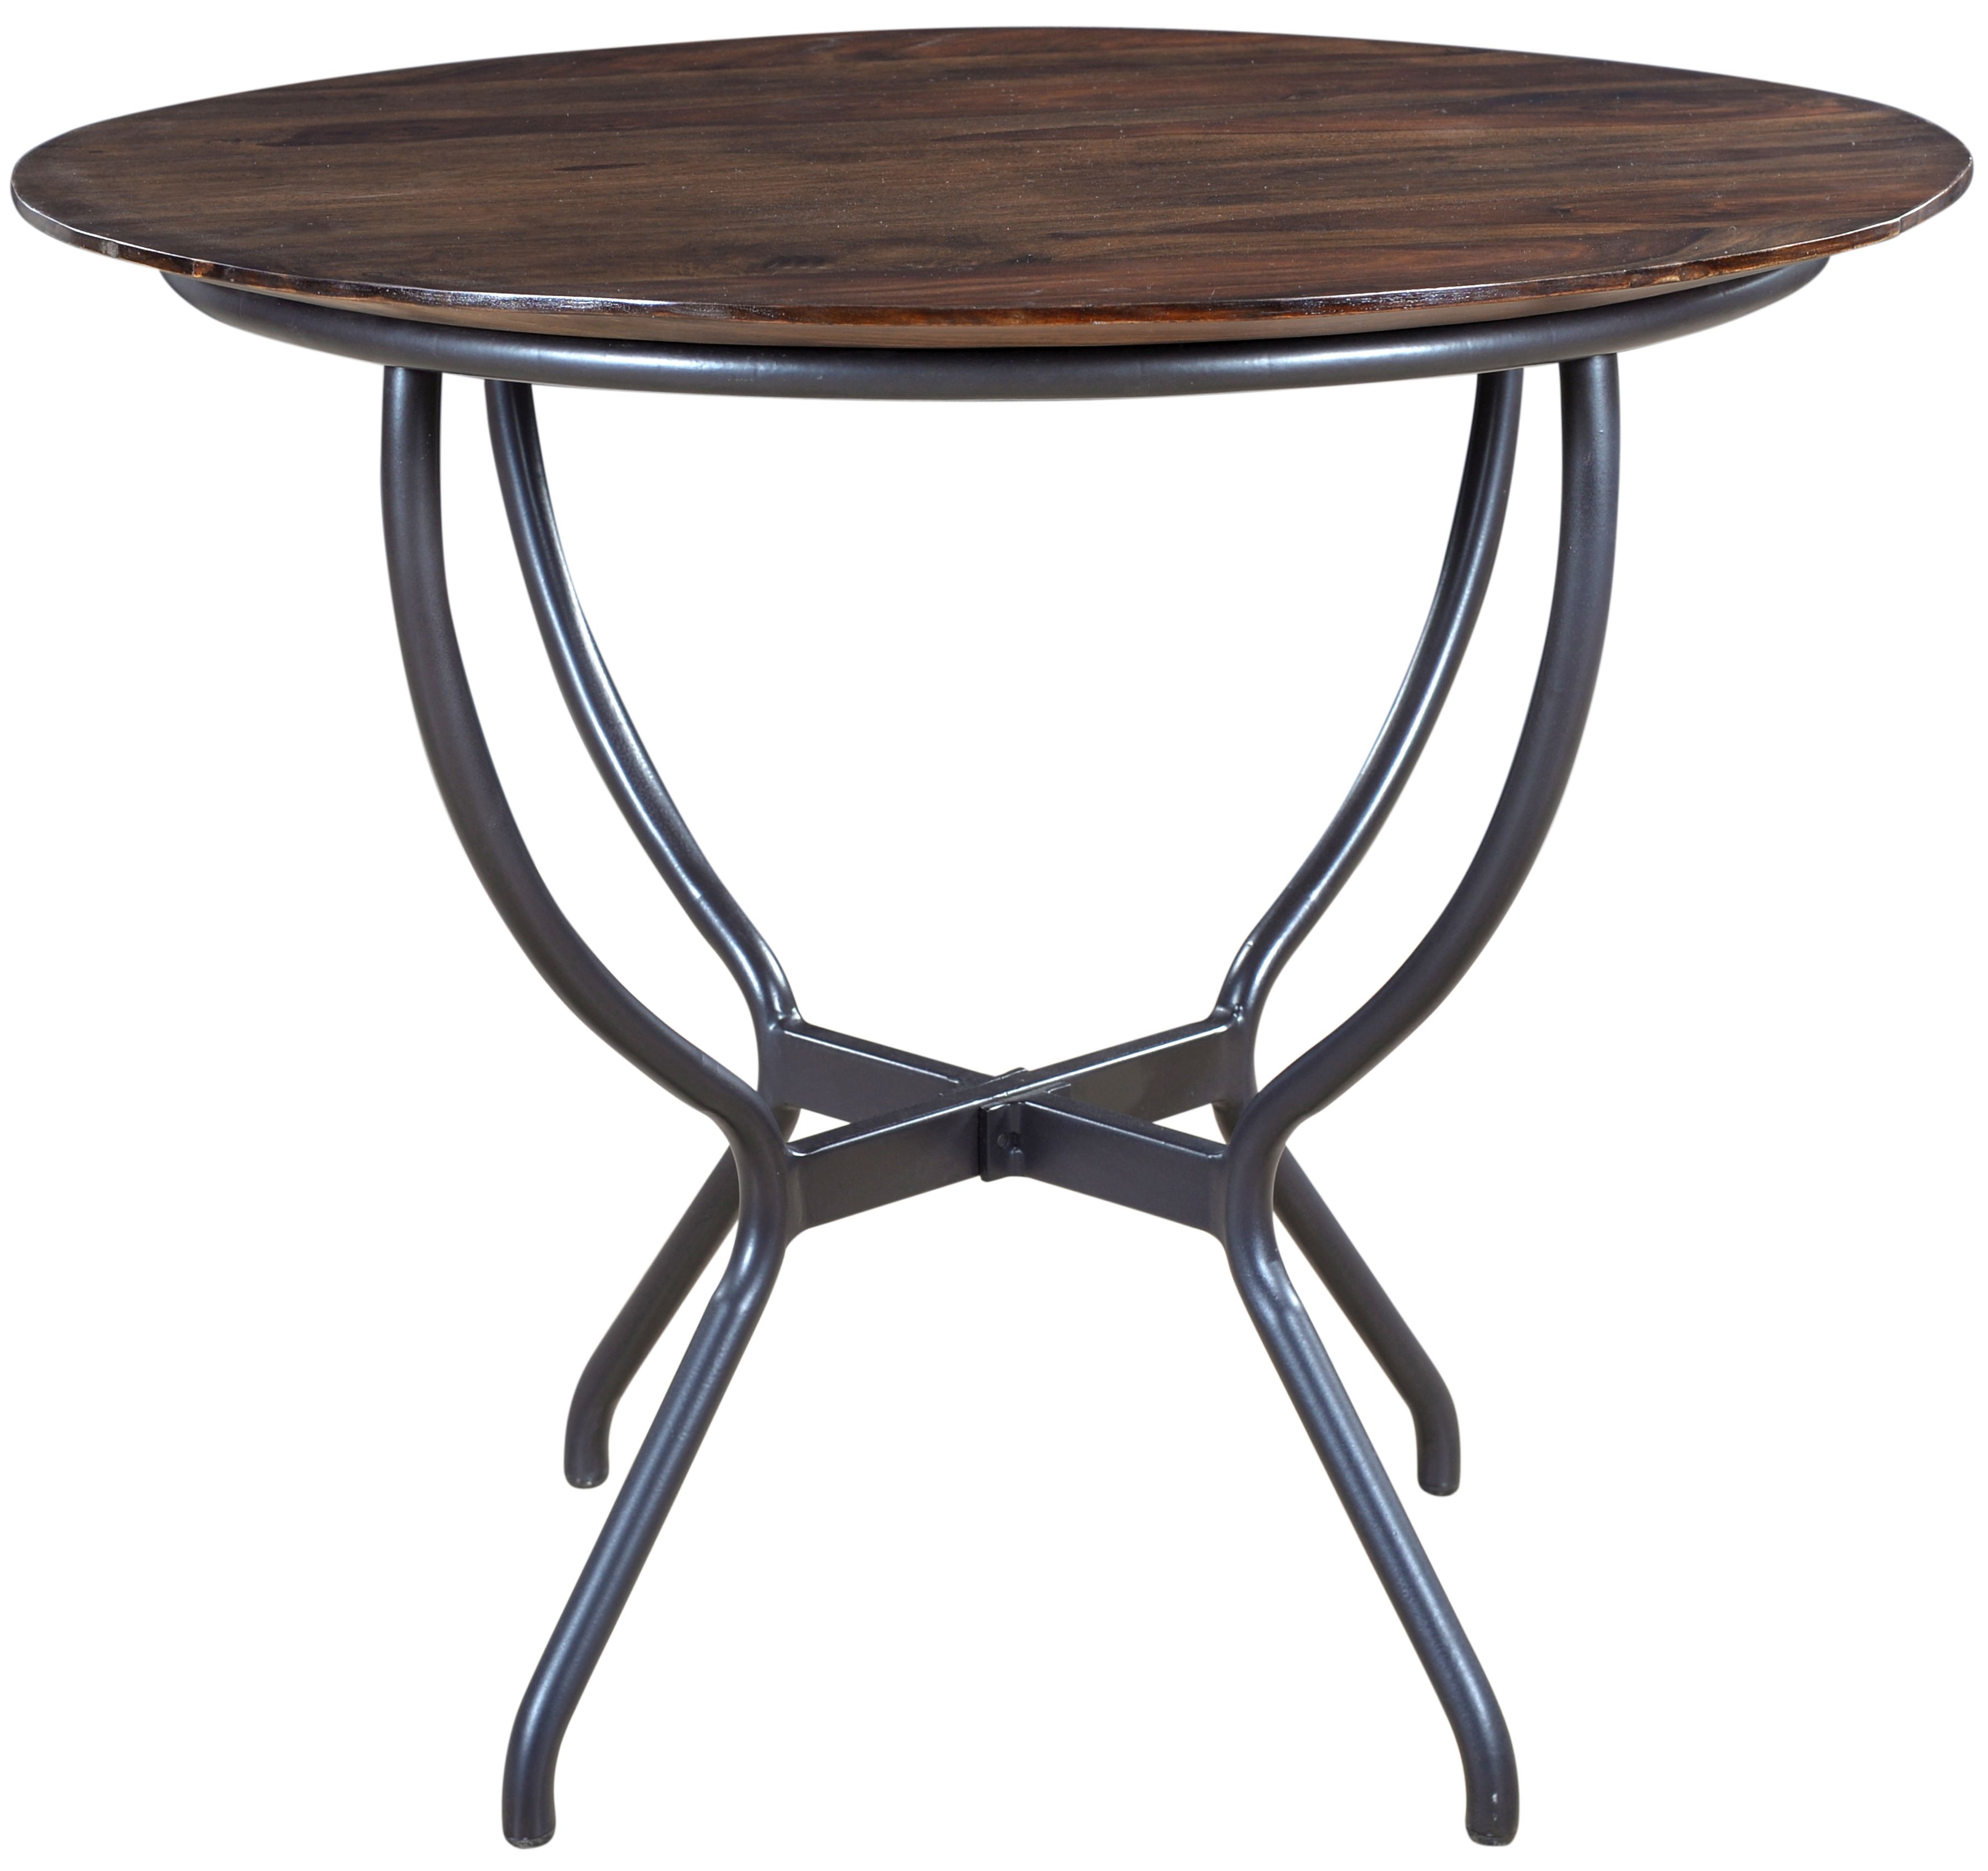 Coast to Coast Imports™ Adler Honey Brown Dining Table